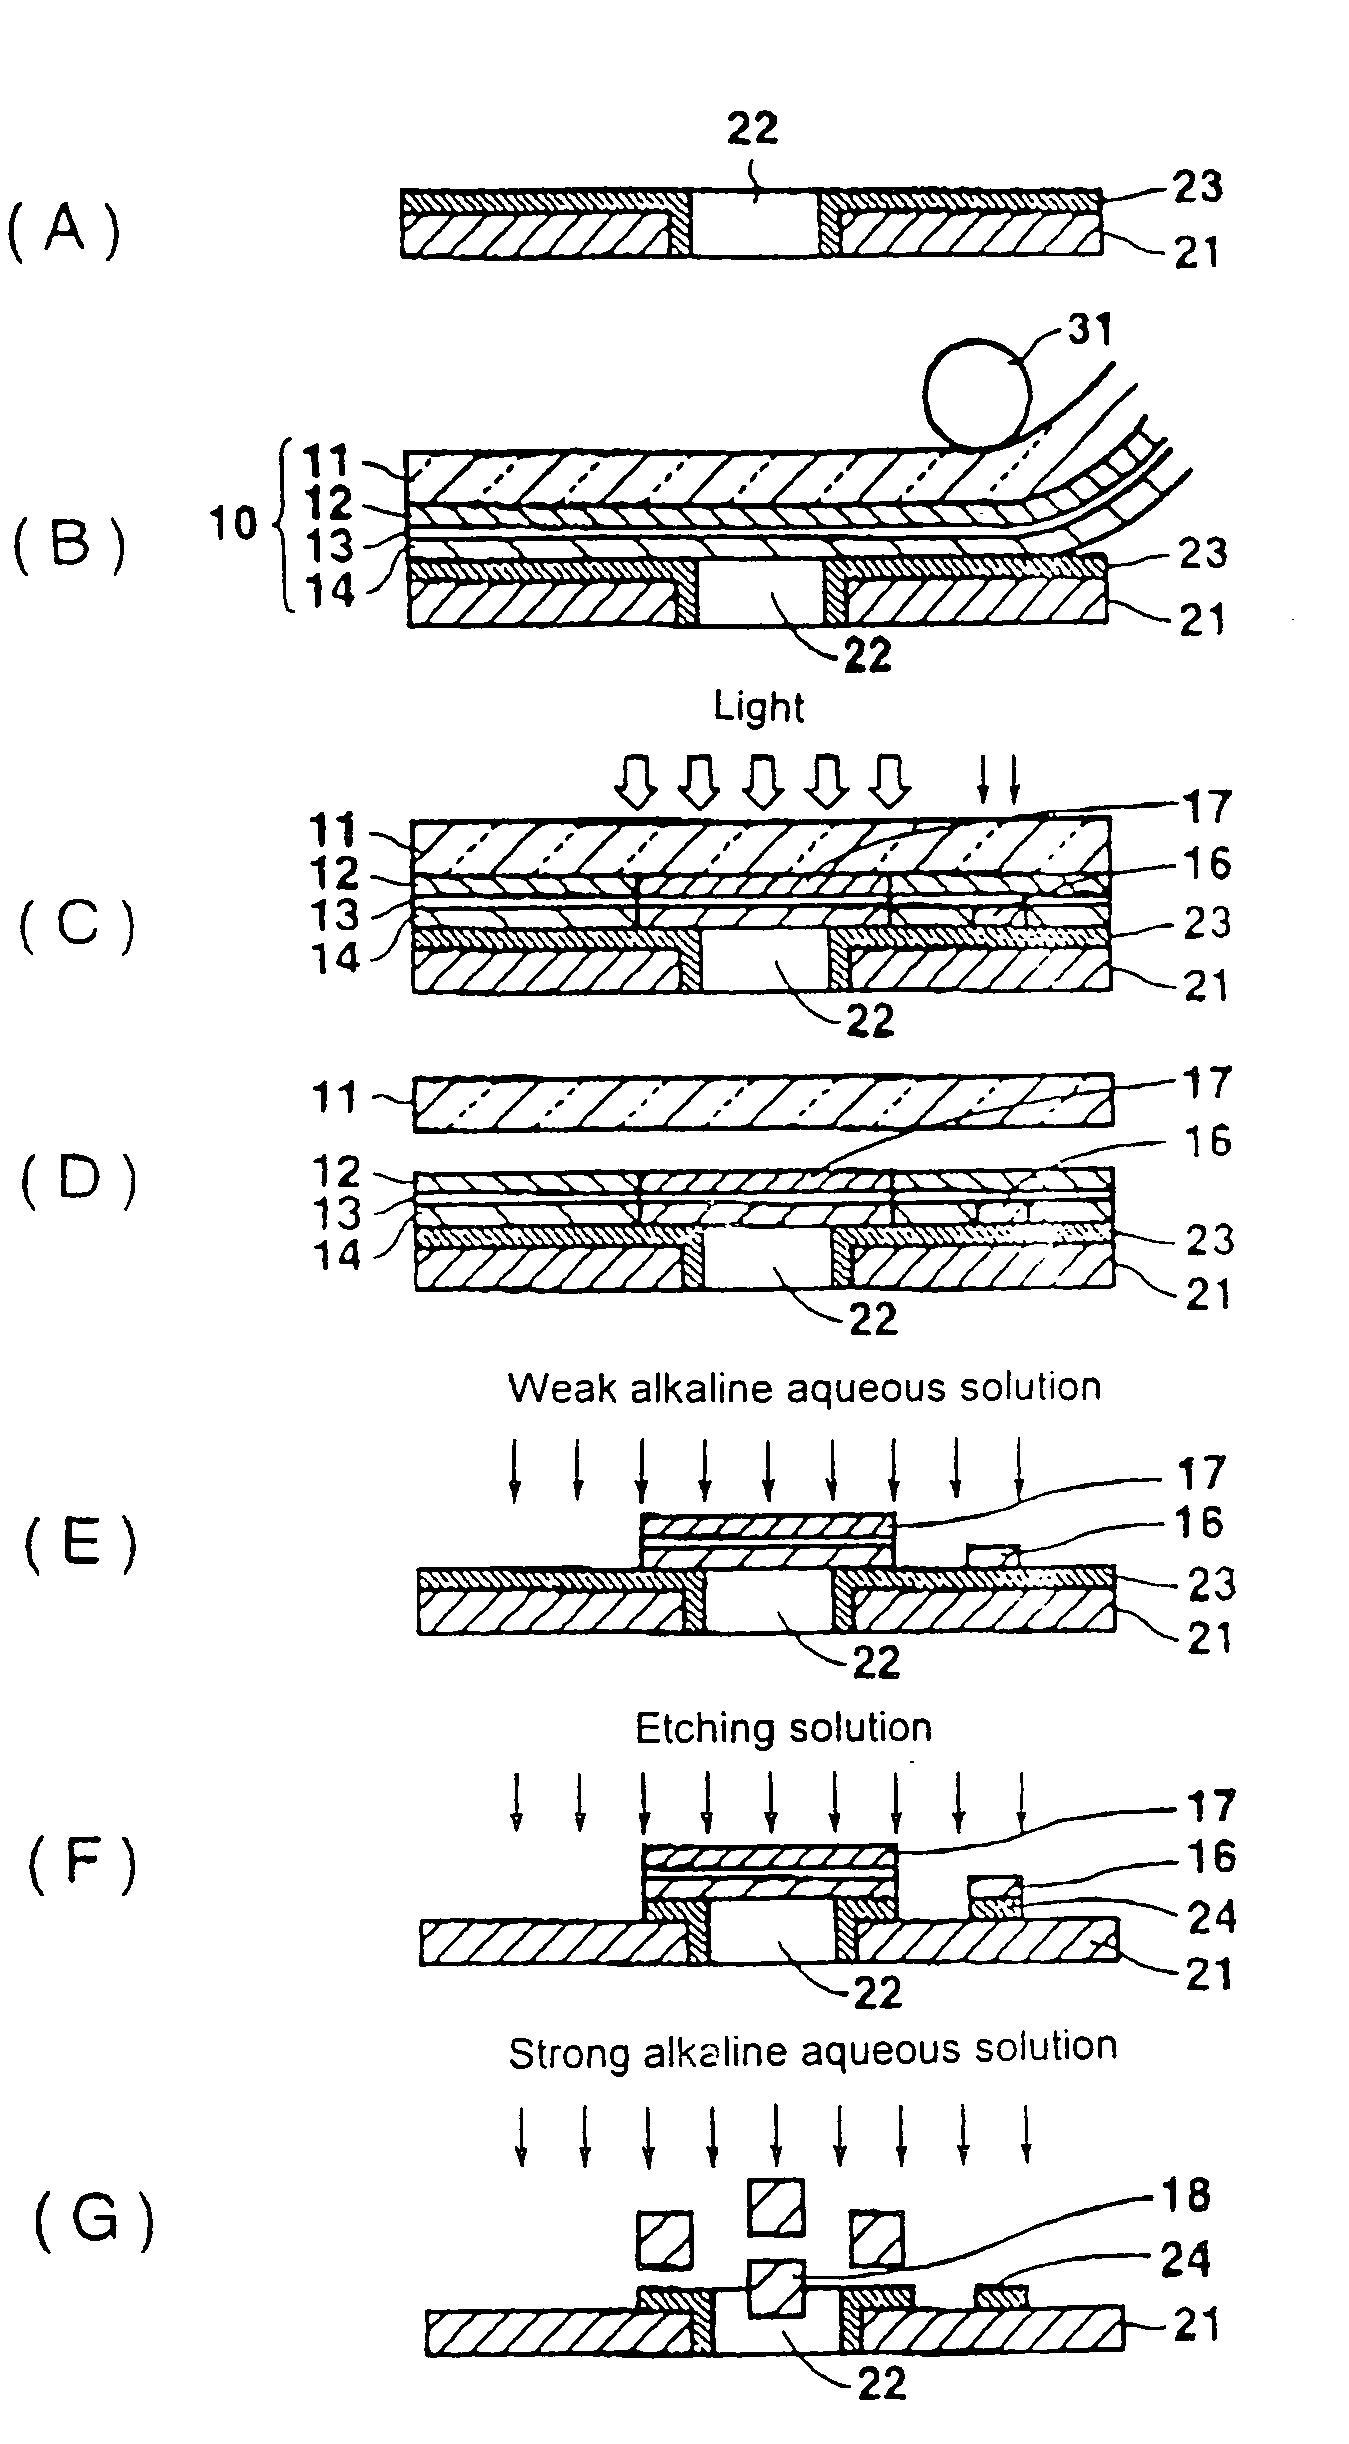 Light-sensitive sheet comprising support, first and second light-sensitive layers and barrier layer